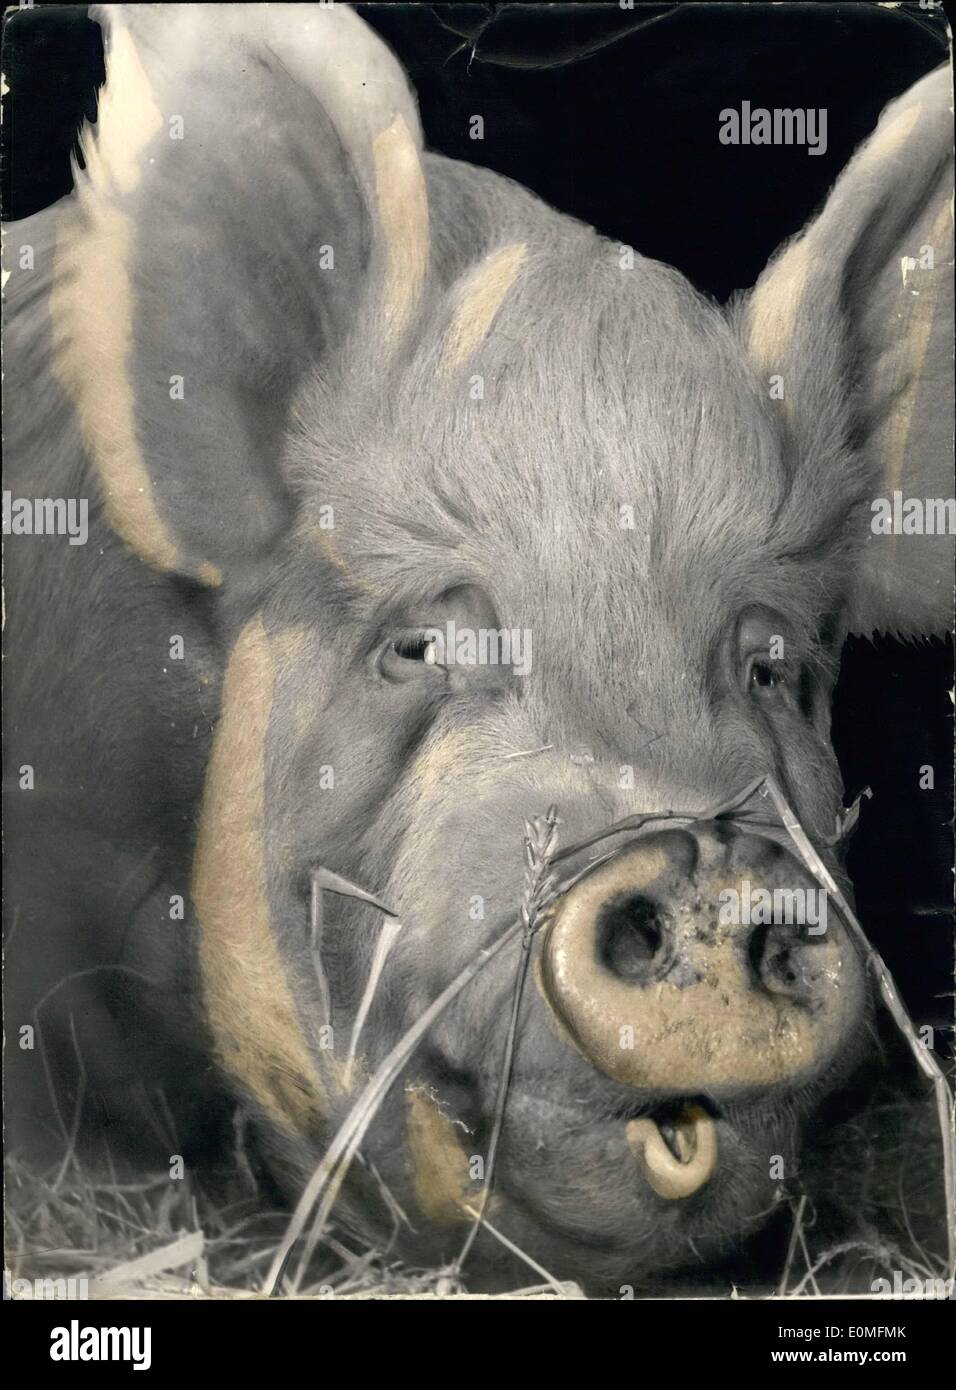 Mar. 03, 1955 - What A Pig! A Normandy pig weighing 400 kg, seen at the Annual Agricultural Show being held at the Porte de Versailles, Paris. Stock Photo